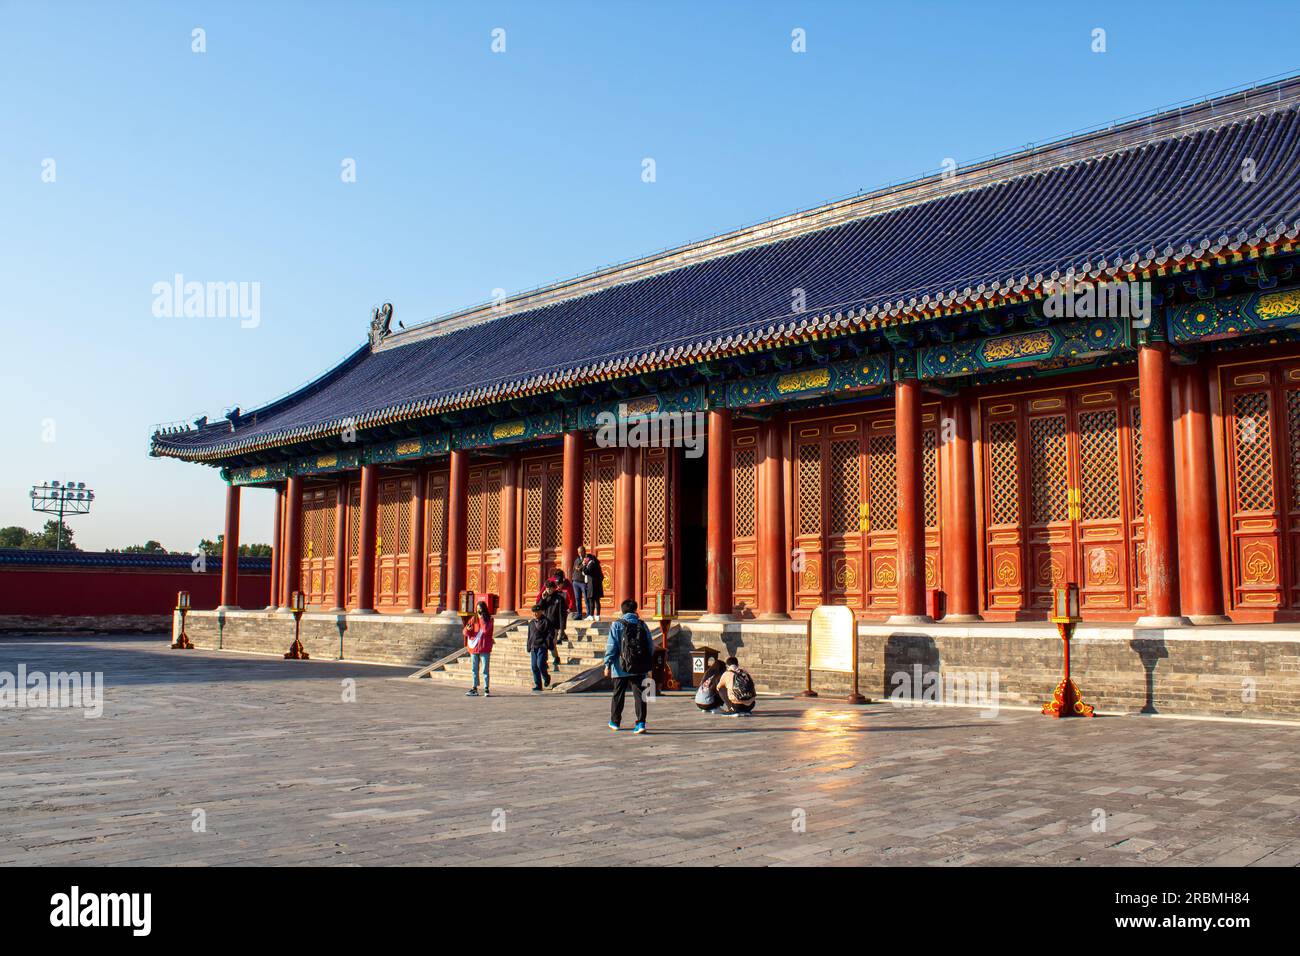 Imperial Hall of Heaven in the Temple of Heaven Compound - Beijing, China. Blue sky with copy space for text Stock Photo